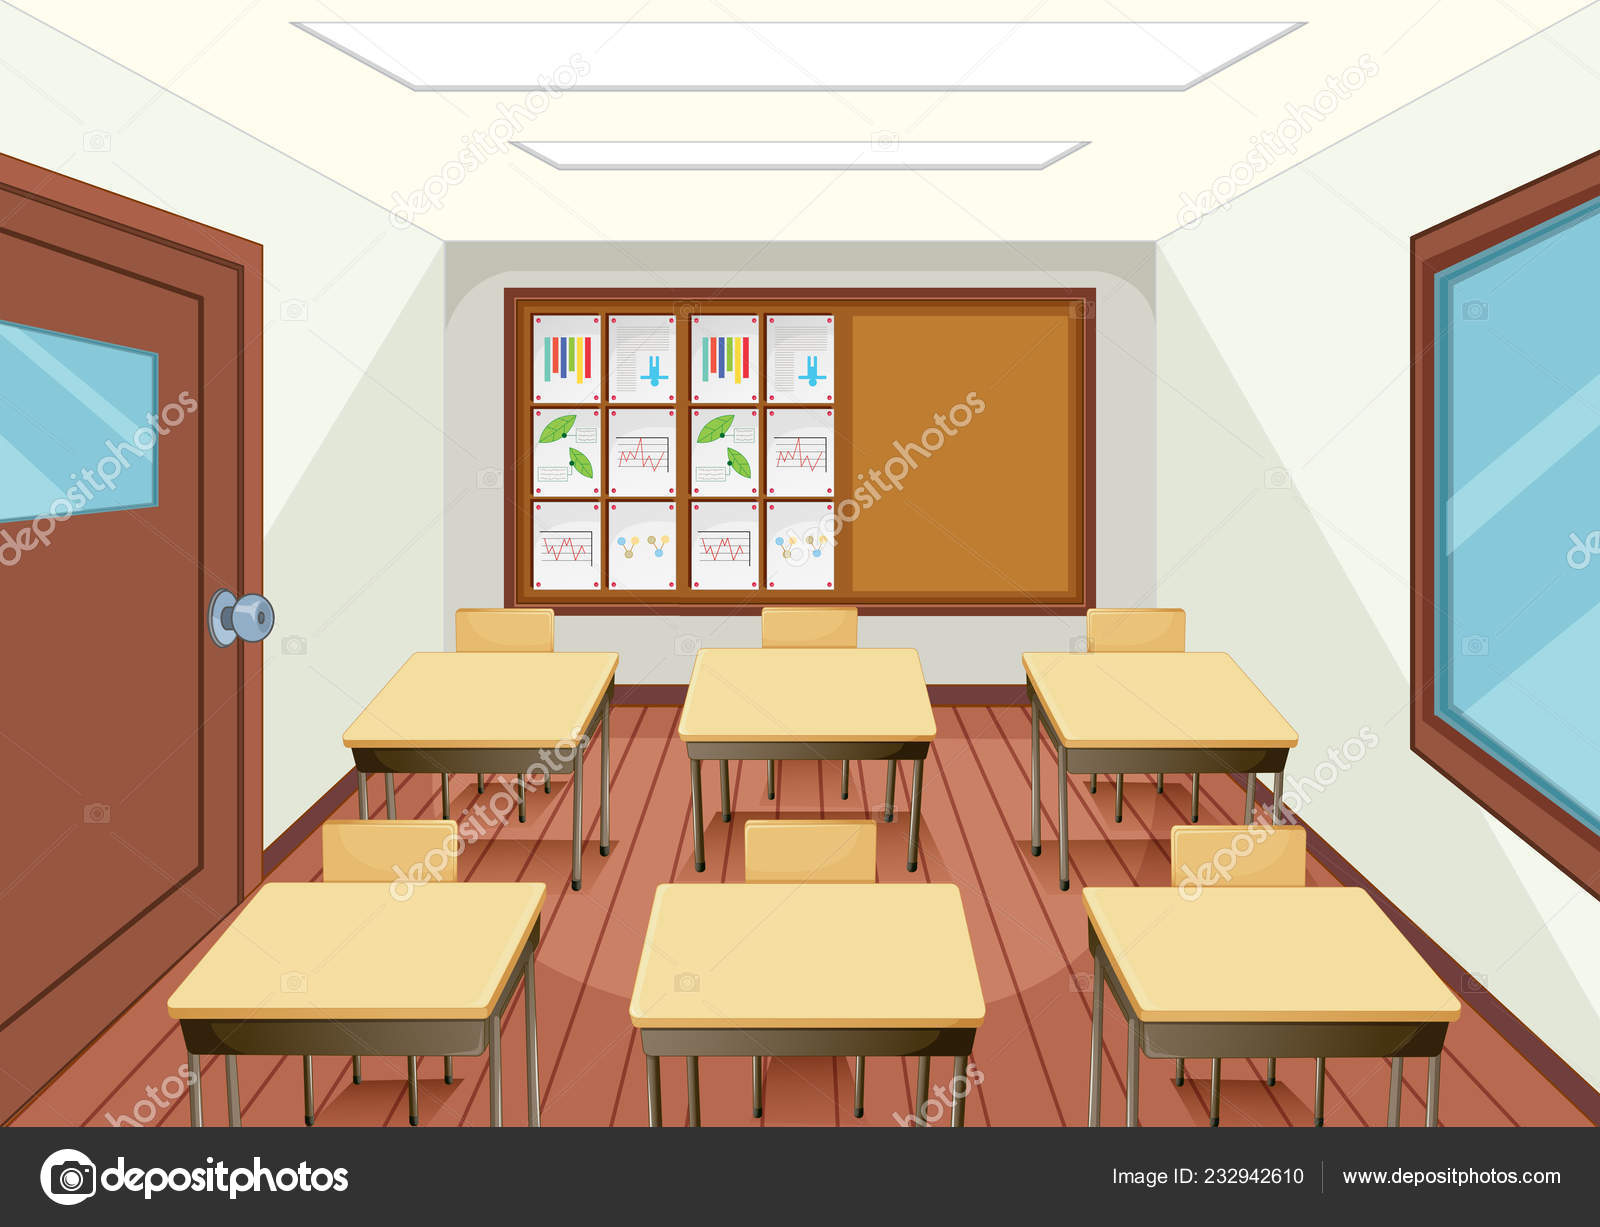 Empty Classroom Interior Design Illustration Stock Vector Image by  ©interactimages #232942610